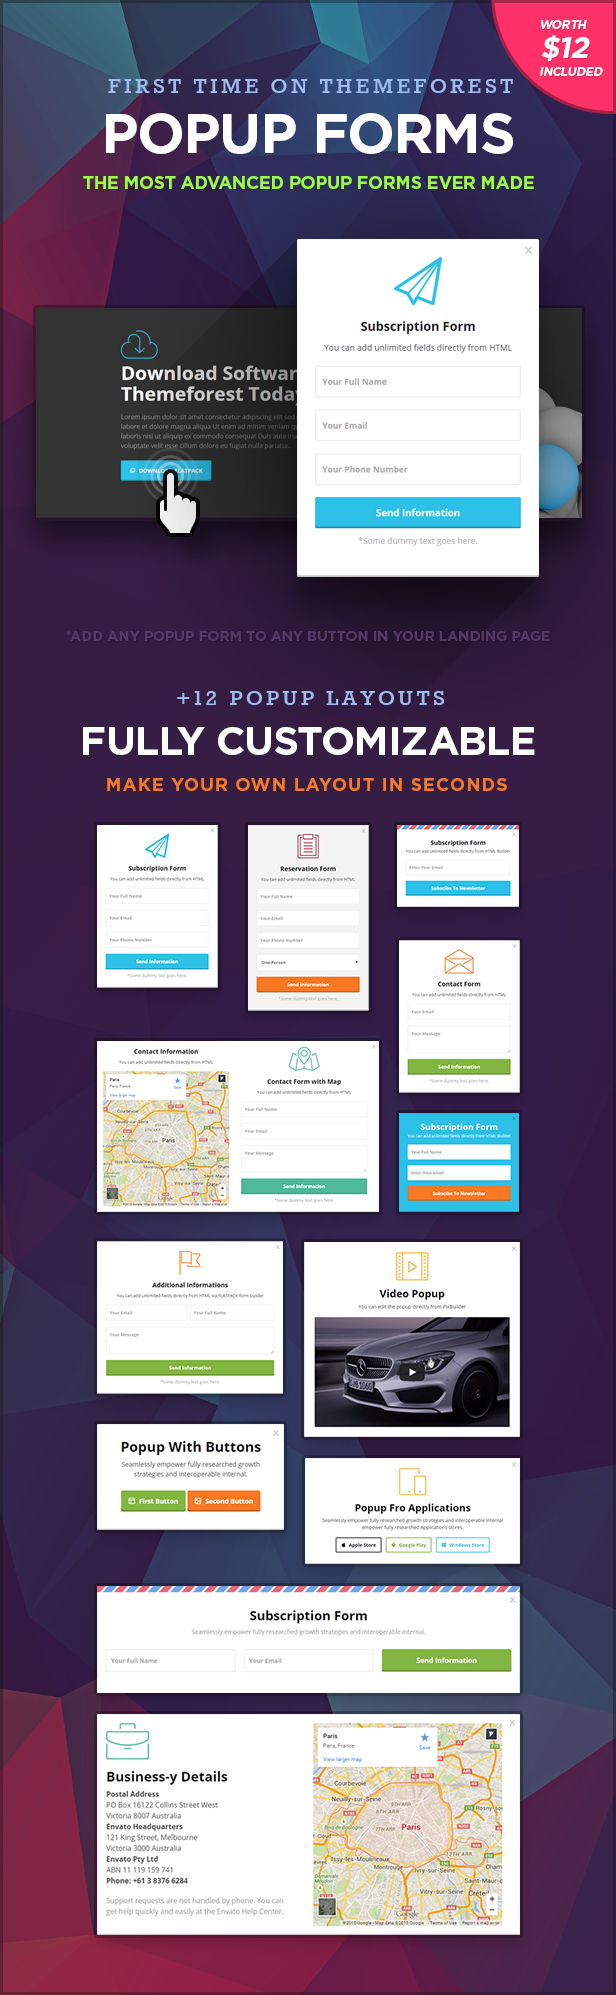 FLATPACK – Landing Pages Pack With Page Builder - 15